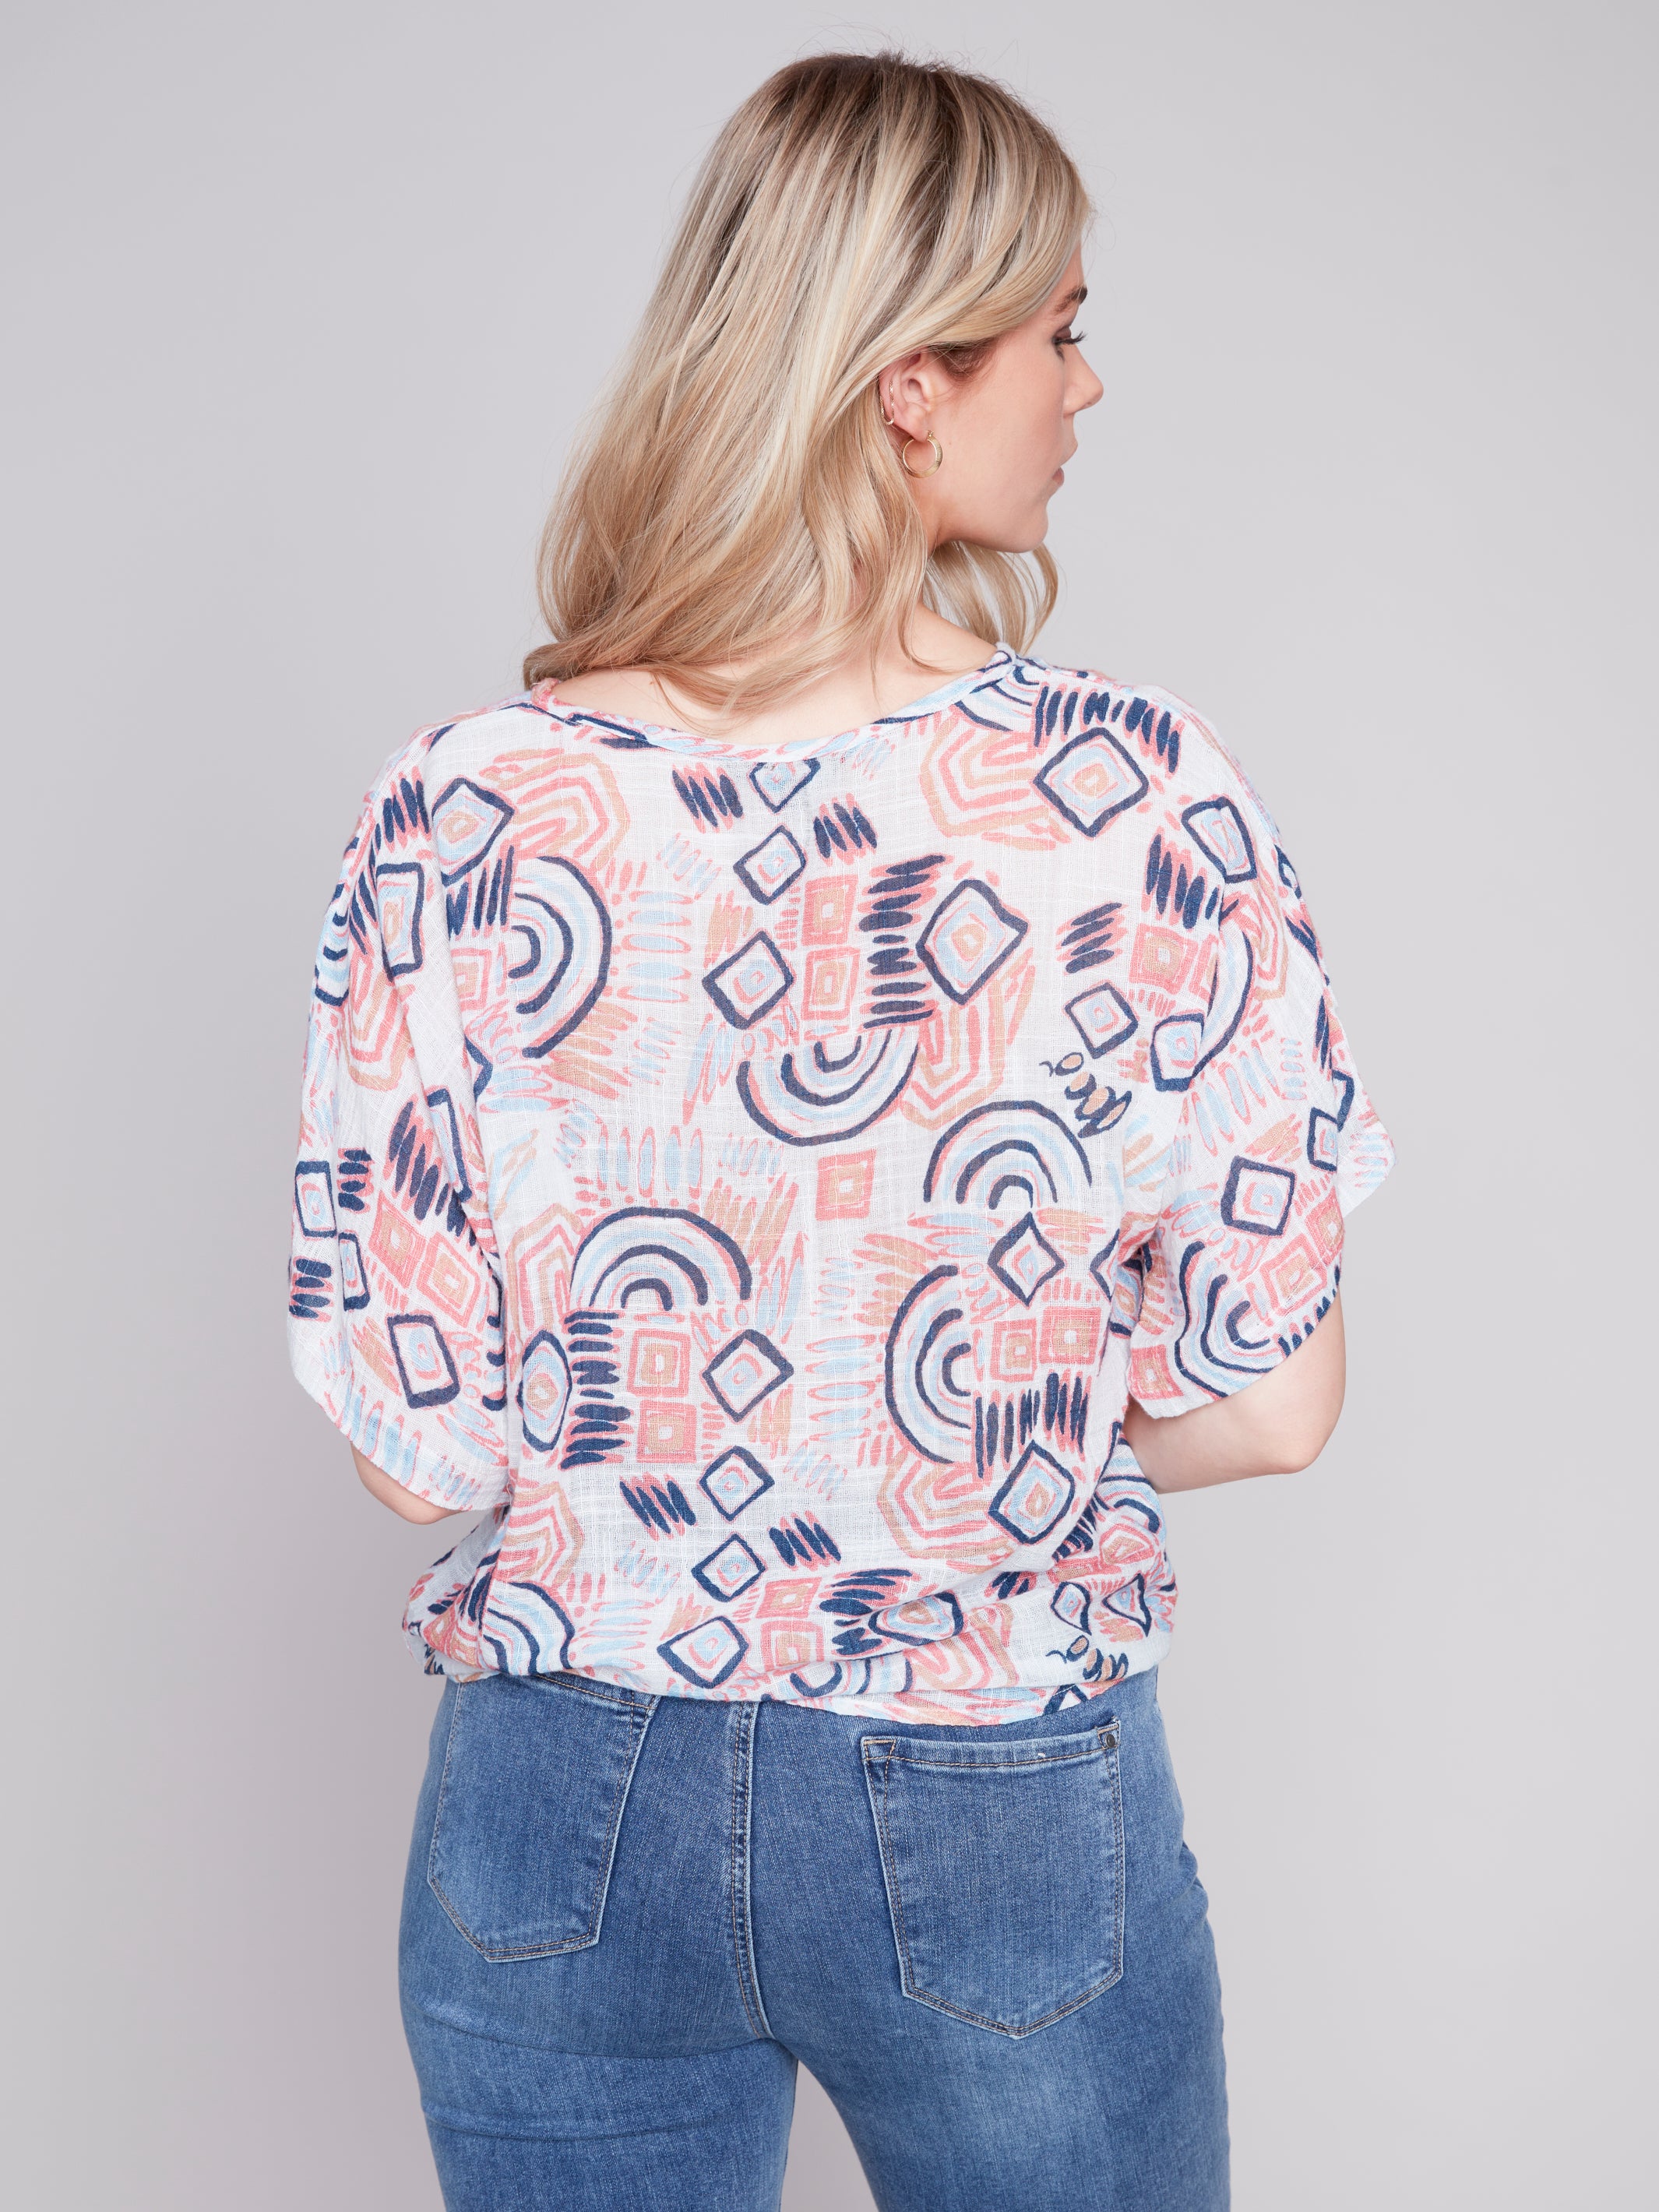 Printed Dolman Cotton Blouse With Side Tie C4403Y/274C